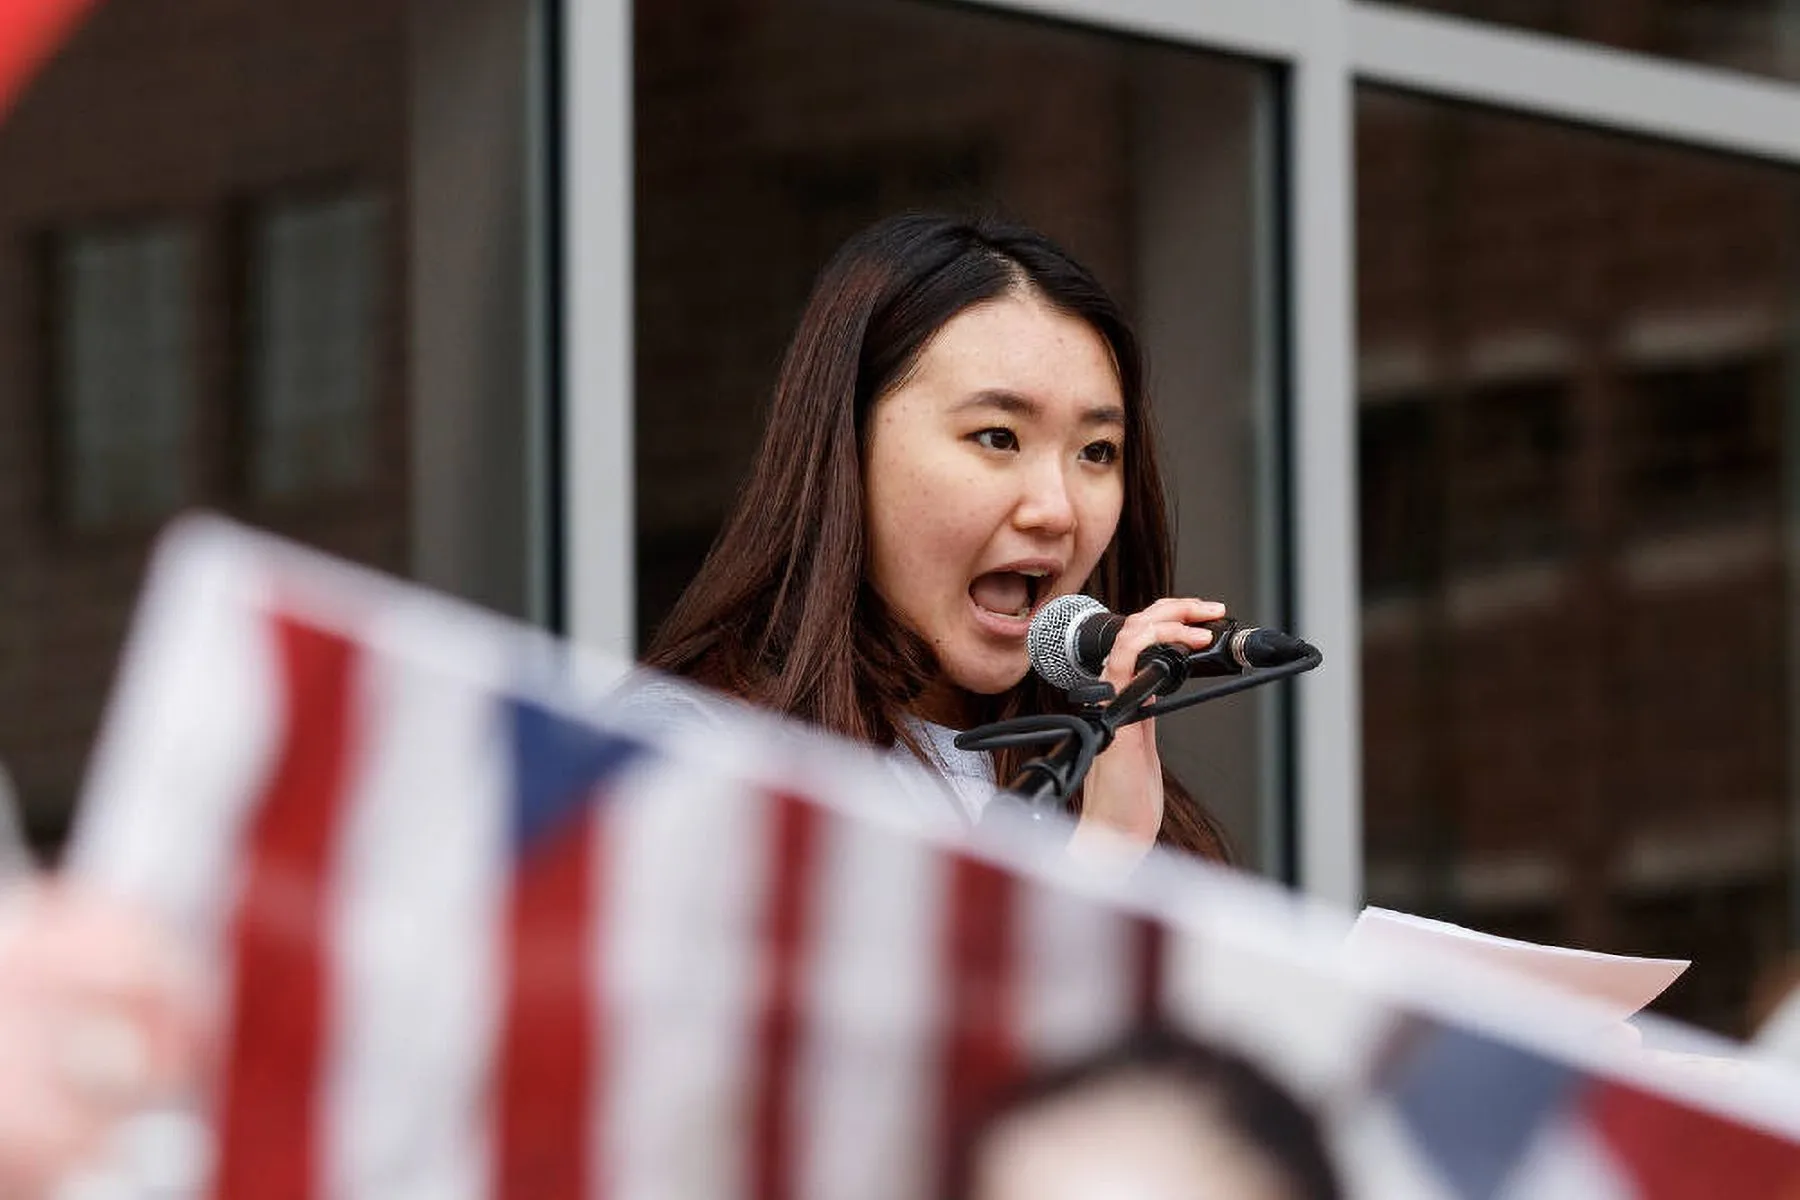 Seo Yoon Yang speaks into a microphone at a gathering.